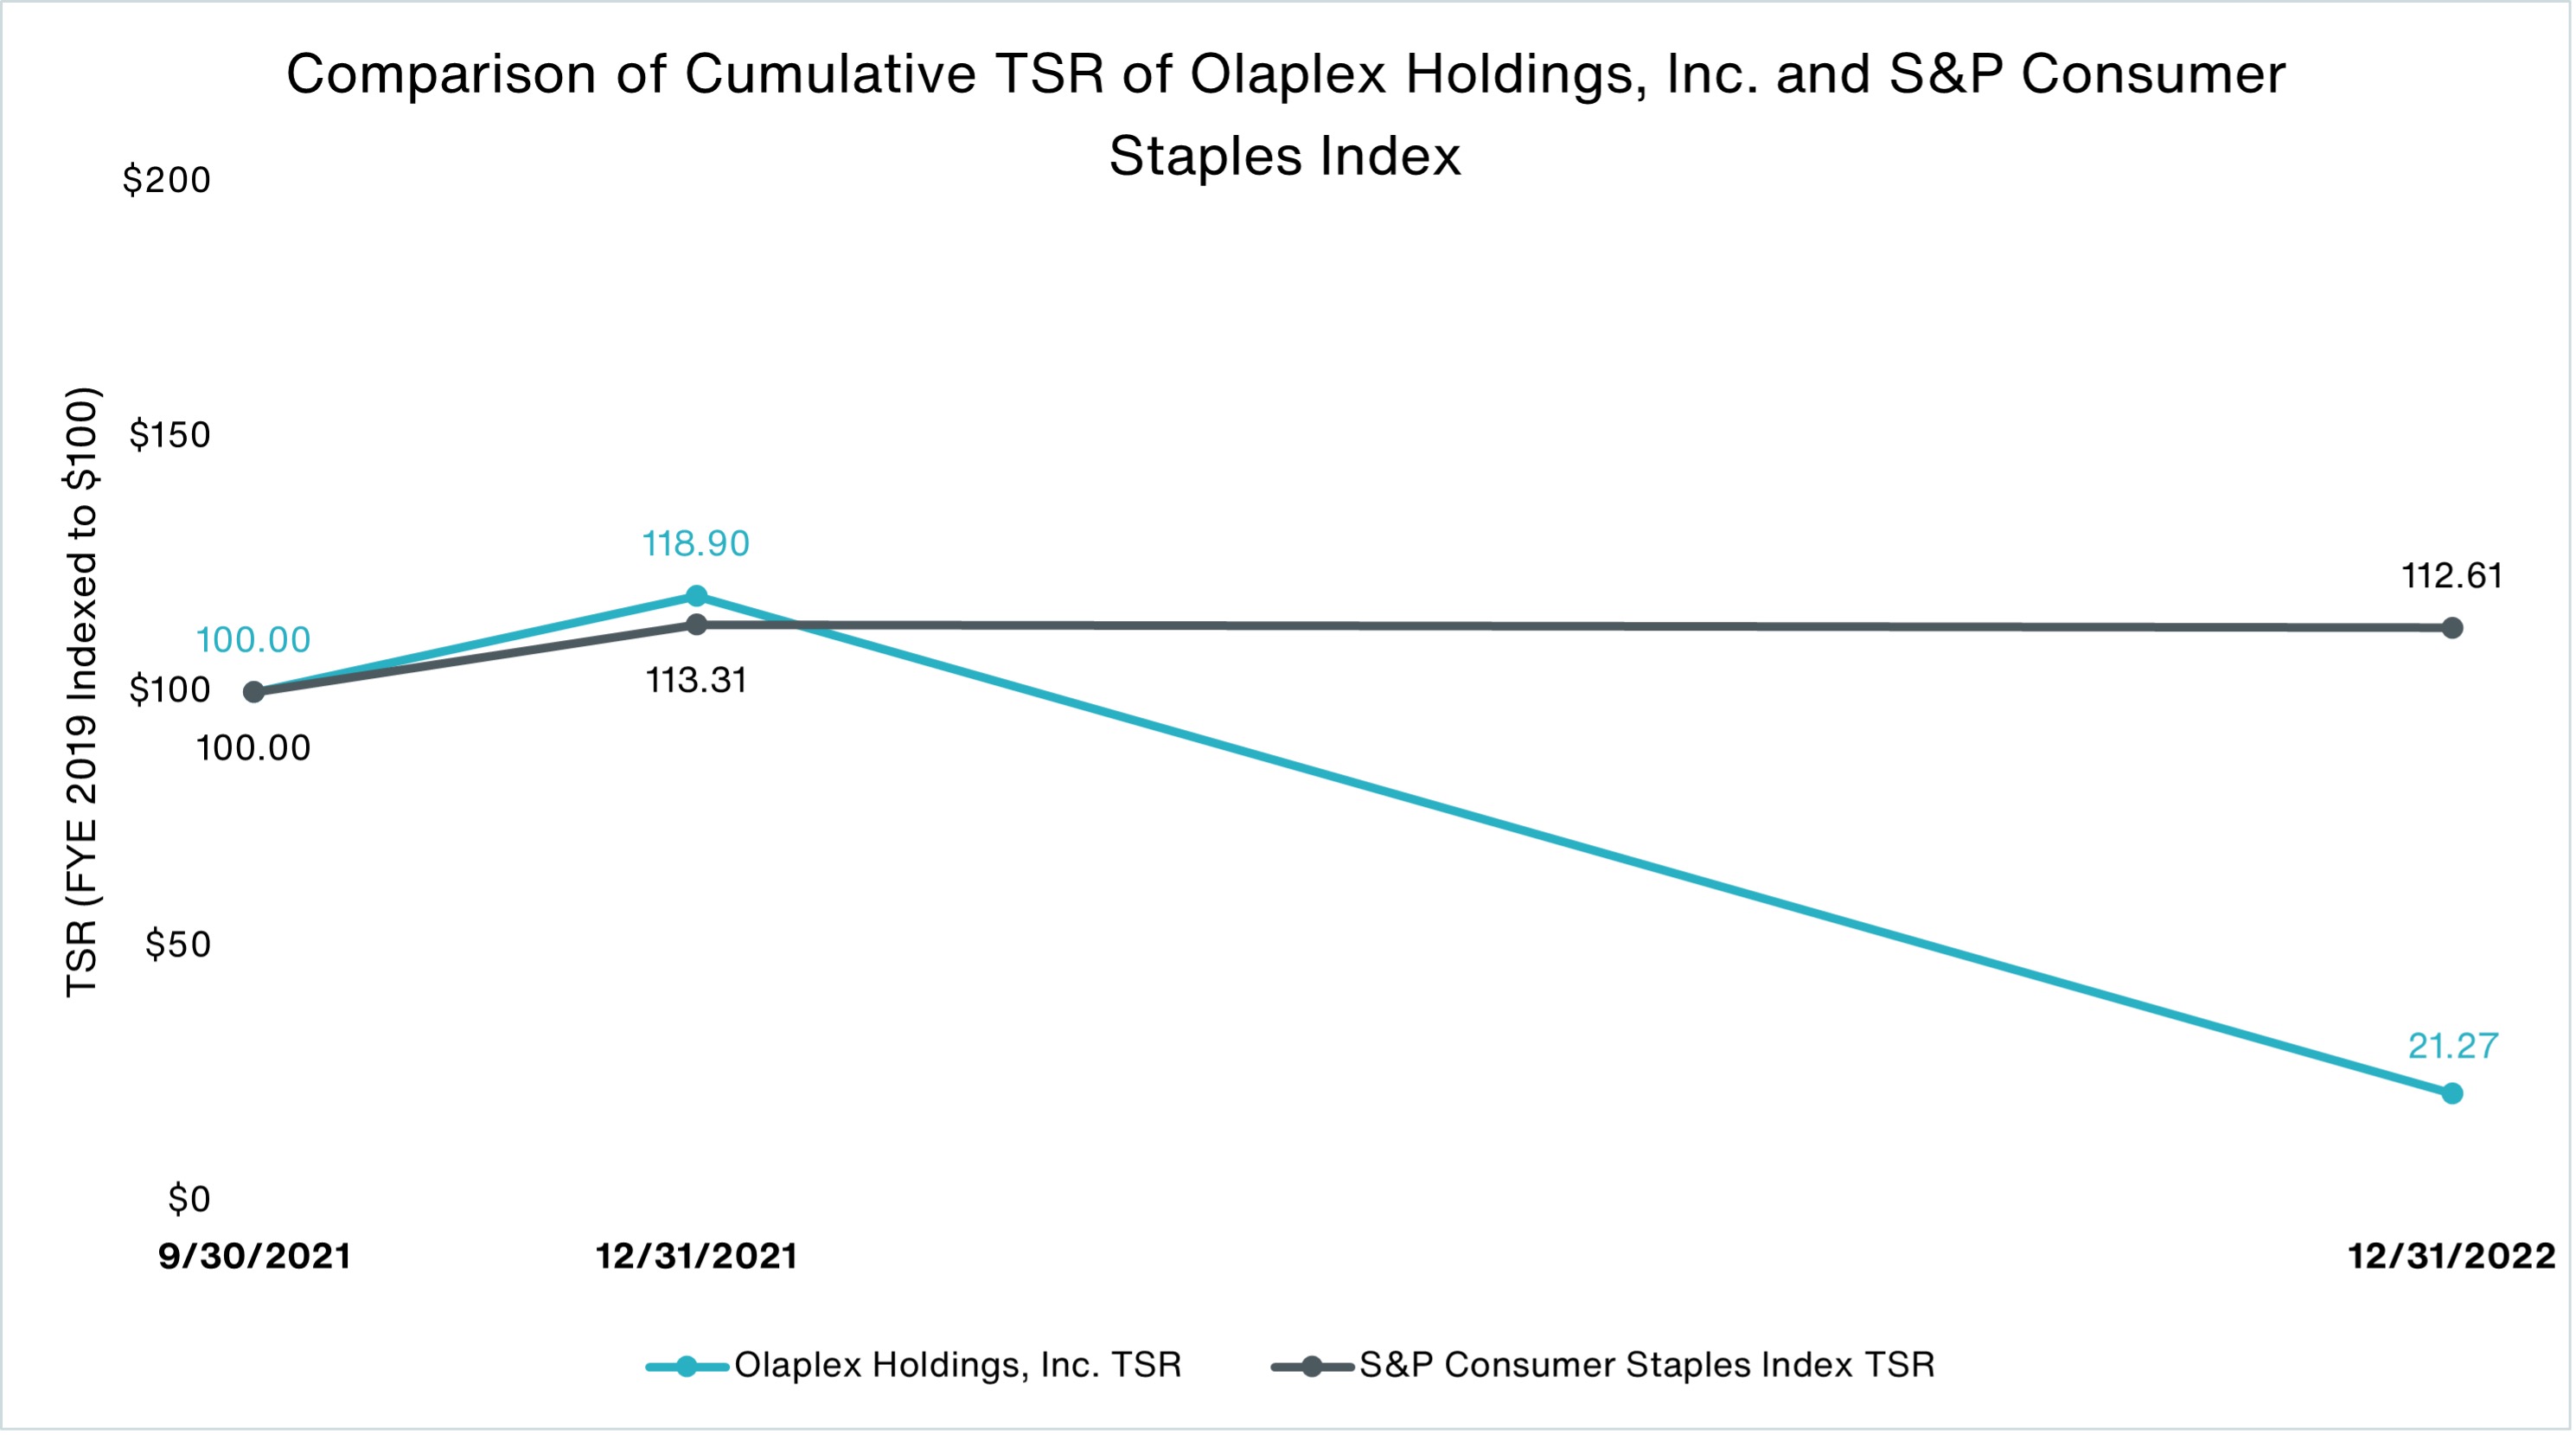 Line chart Comparison of Cumulative TSR of Olaplex Holdings, Inc. and S&P Consumer Staples Index showing $100 invested in 2021 to be $21.27 in 2022